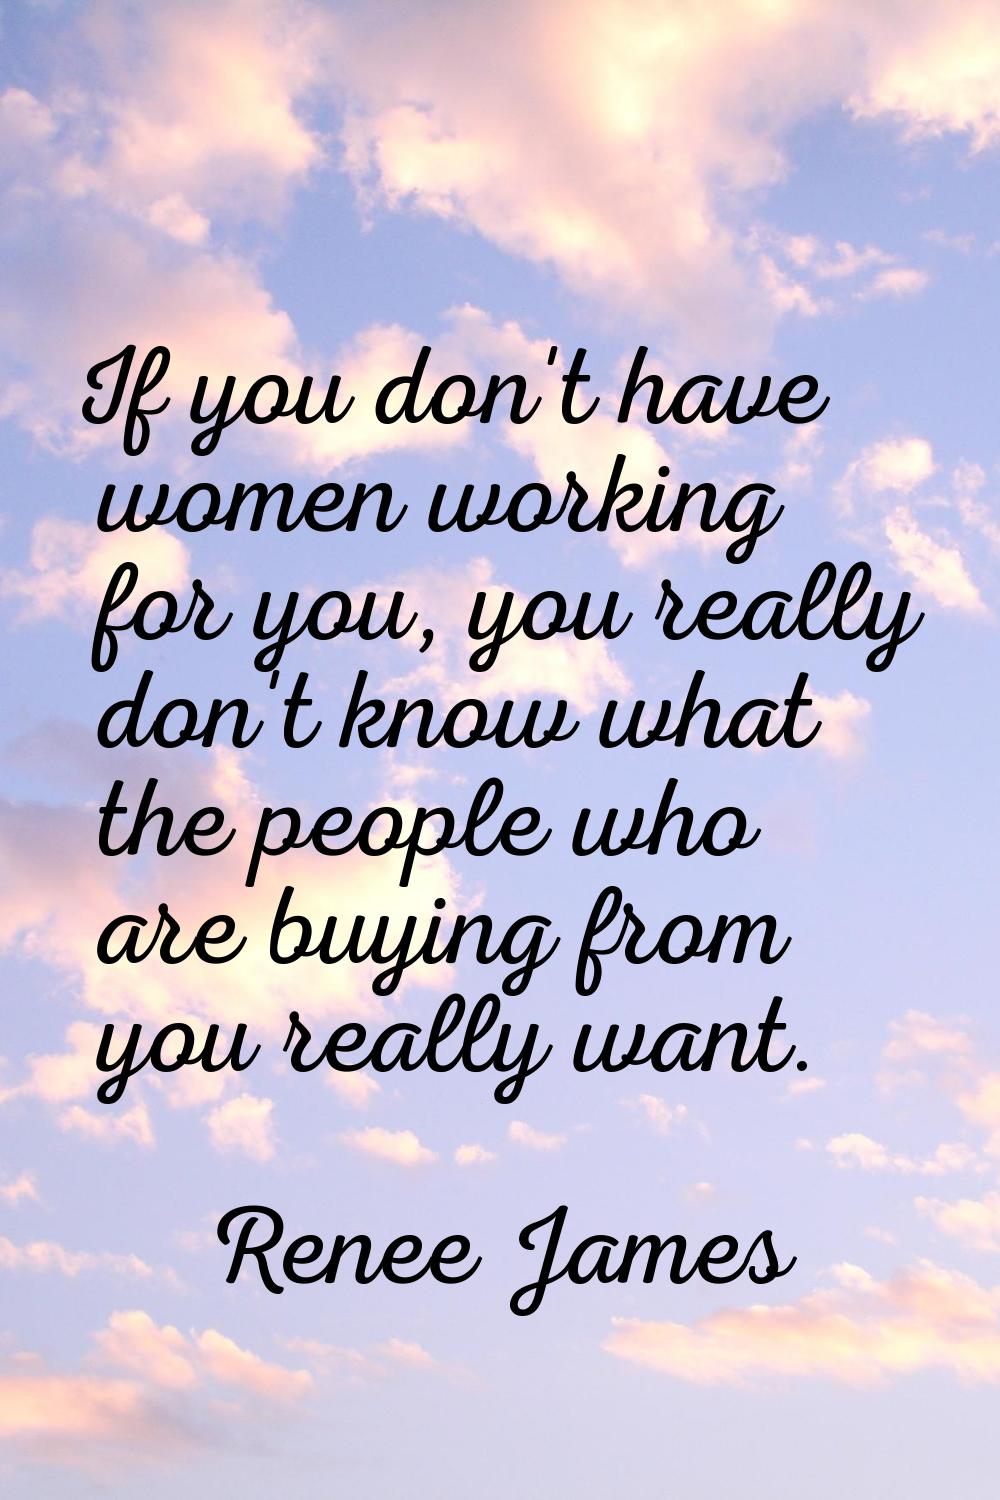 If you don't have women working for you, you really don't know what the people who are buying from 